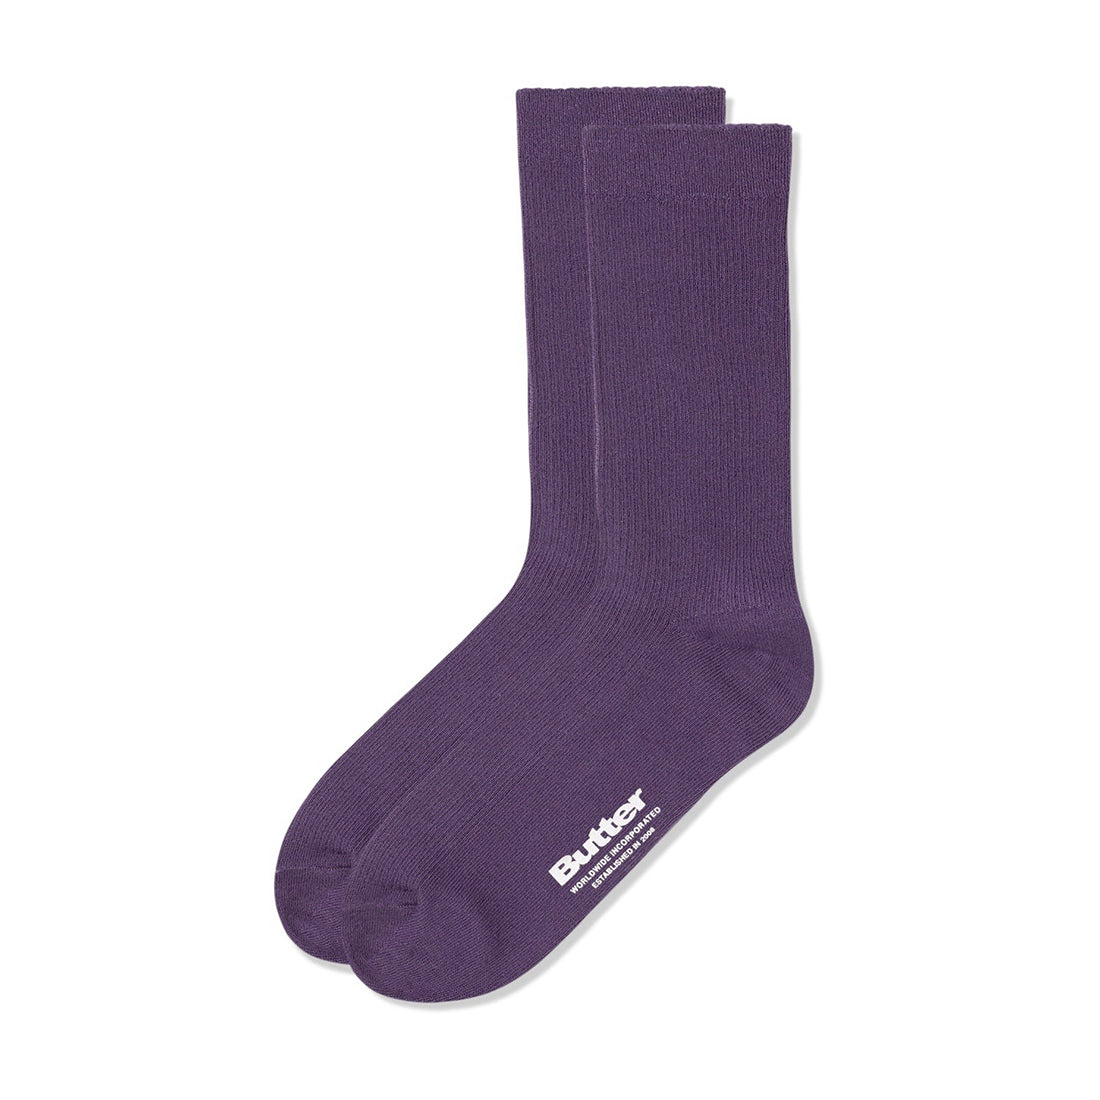 Pigment Dye Socks - Washed Mulberry